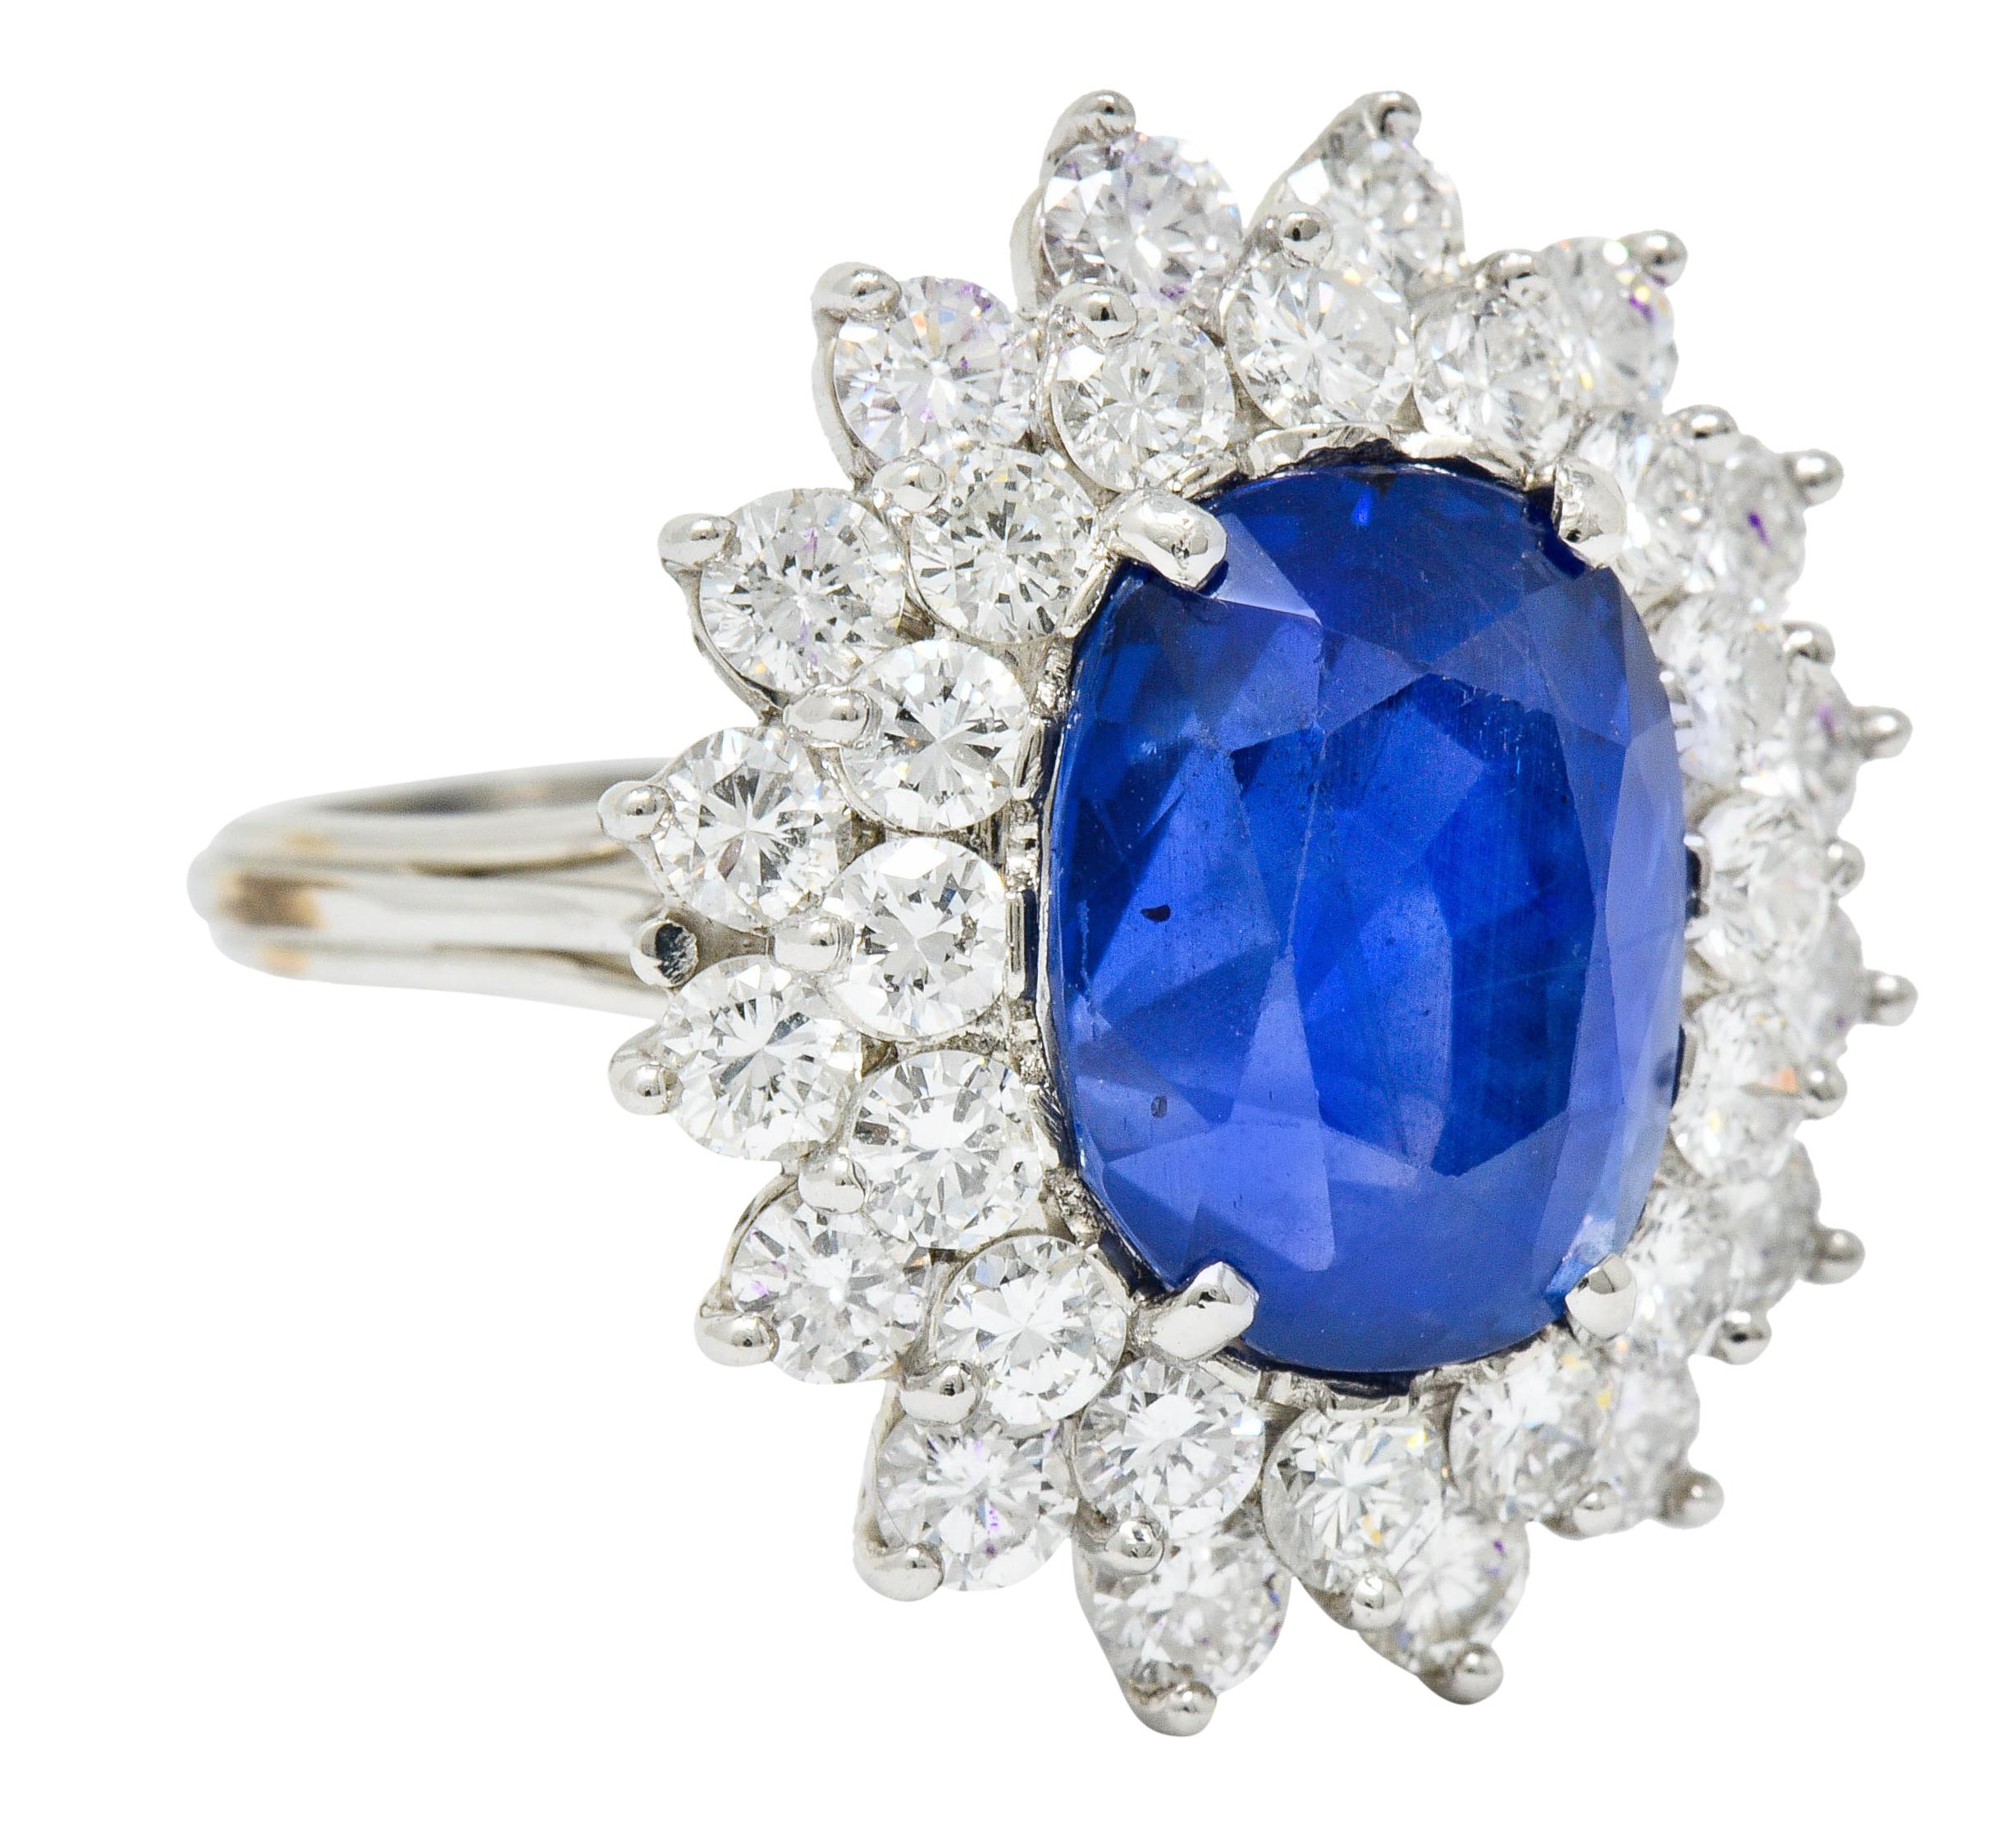 Centering an oval mixed cut Ceylon sapphire weighing 11.07 carats

Translucent and impressively blue in color with no indications of heat; Sri Lankan in origin

Surrounded by a double halo of round brilliant cut diamonds

Weighing in total